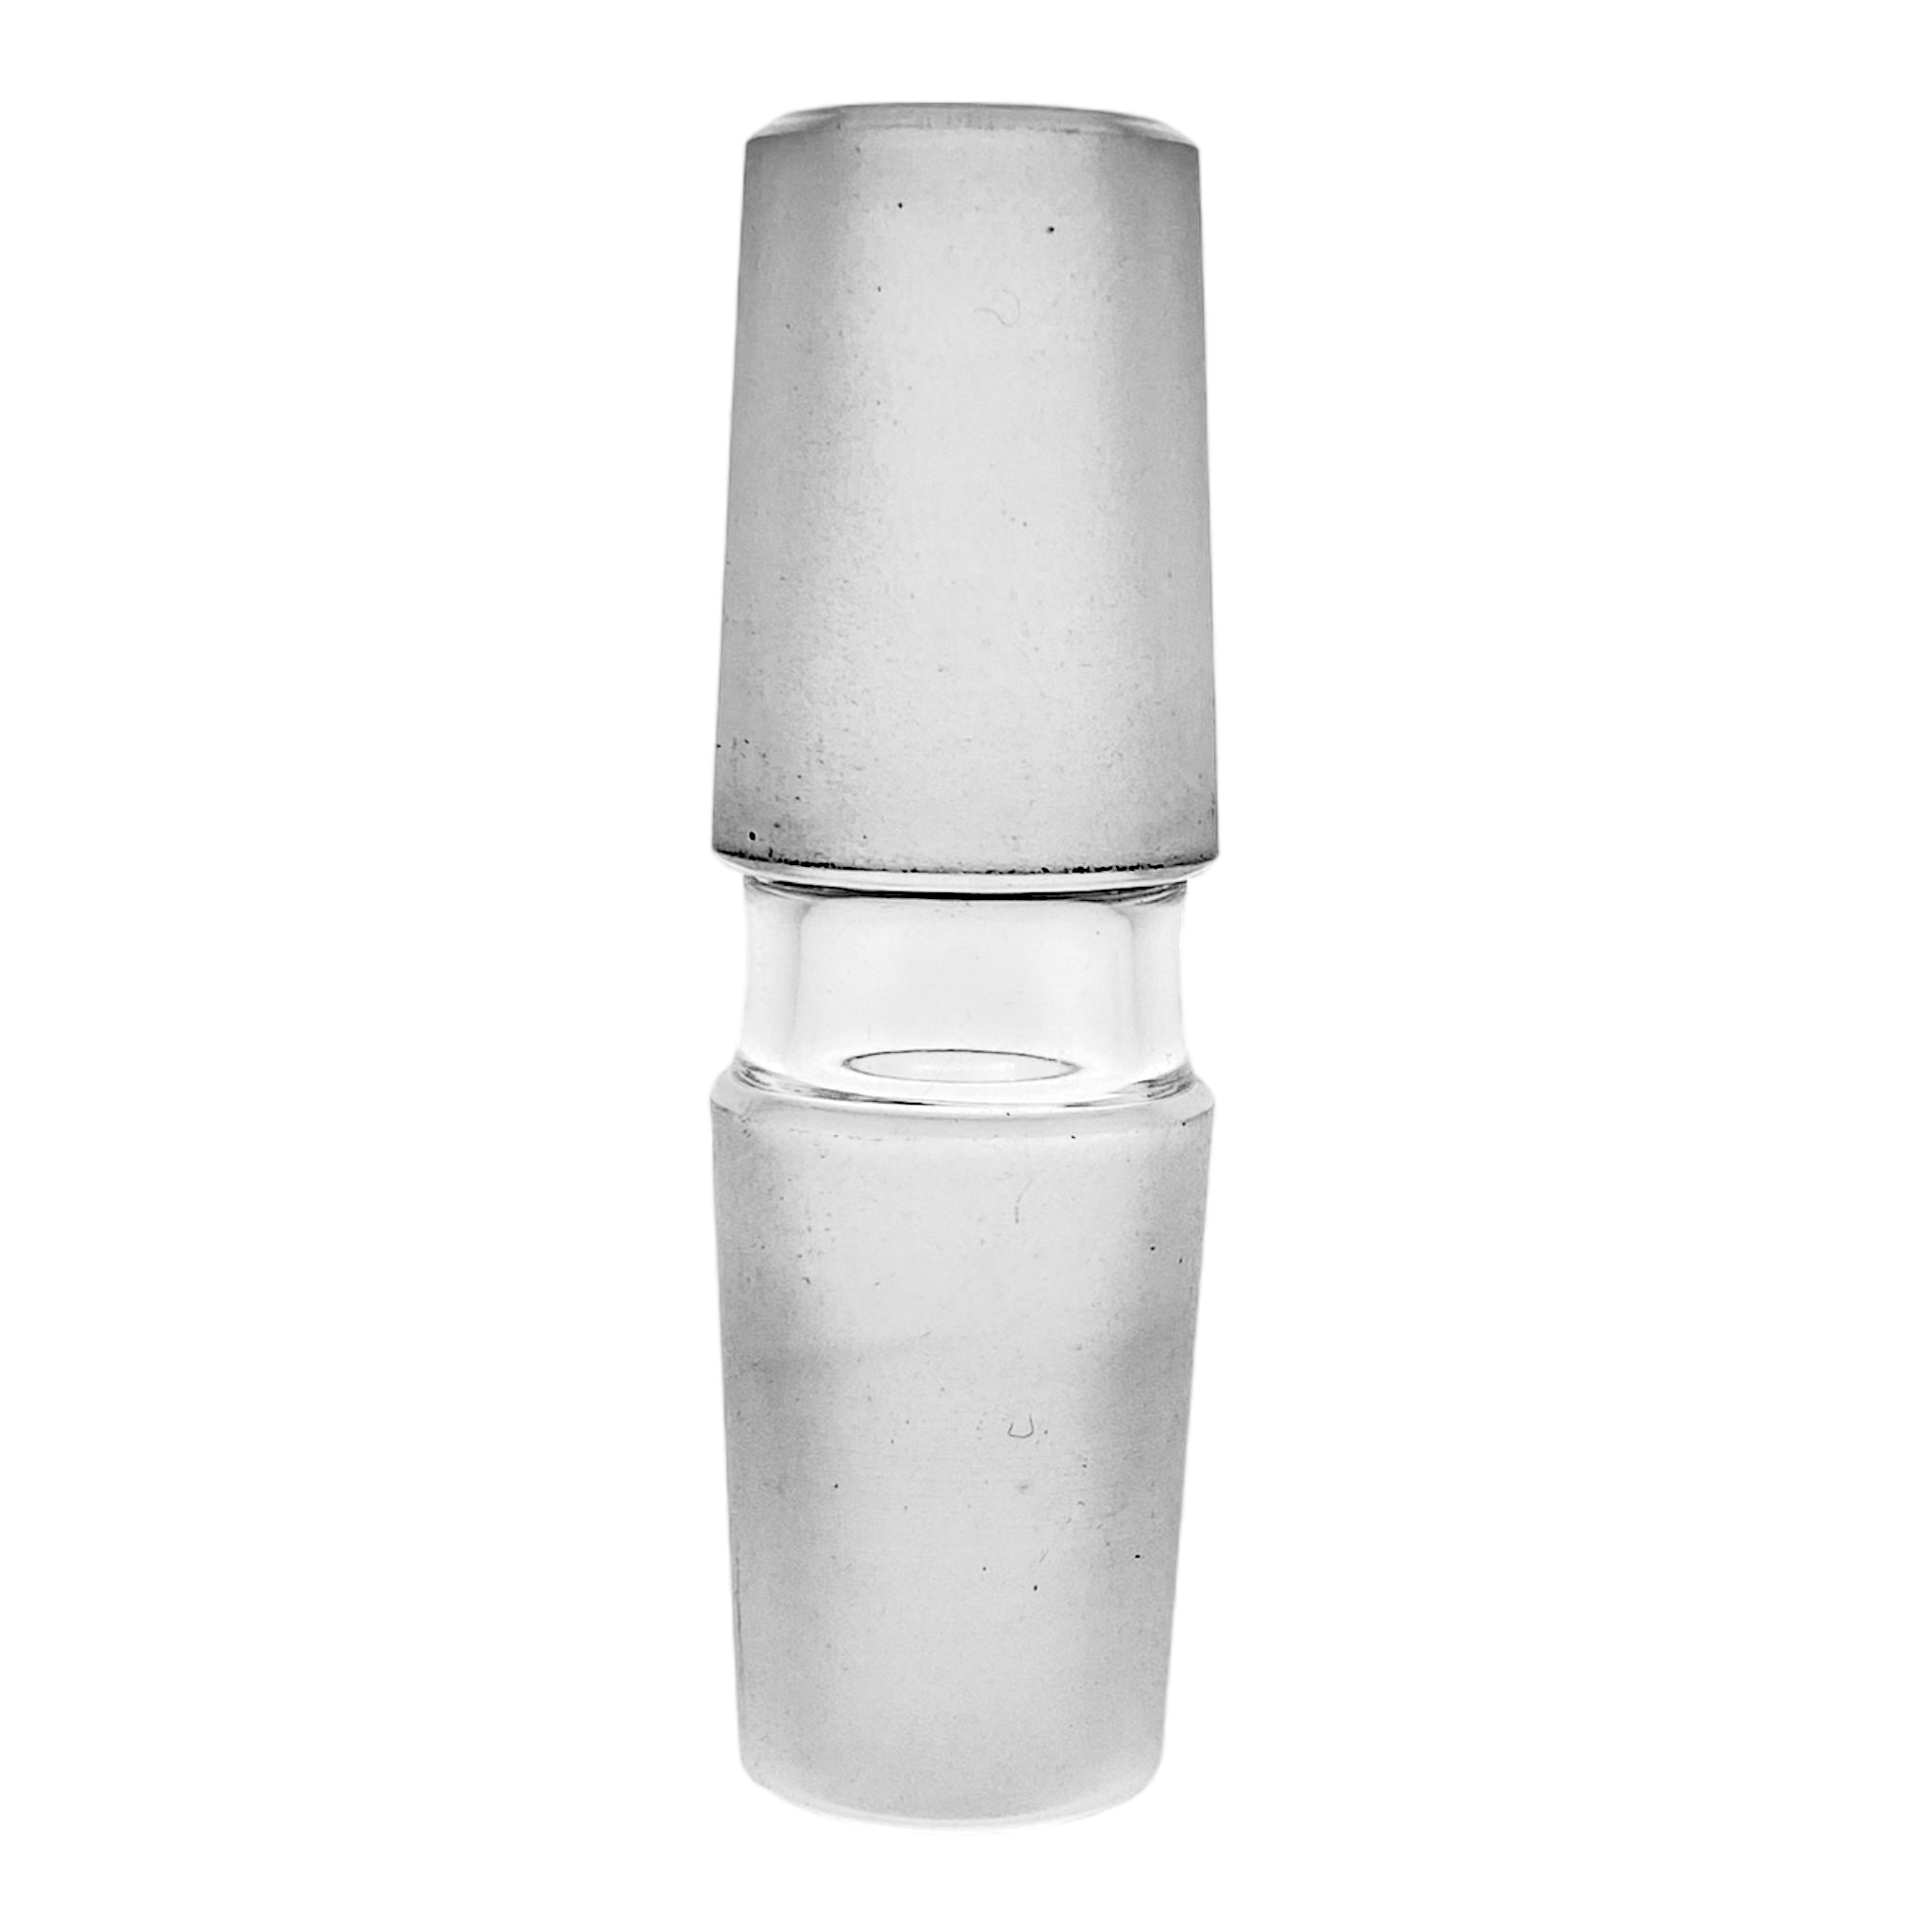 Glass Adapter For Bongs And Dab Rigs - 18MM Male - 18MM Male